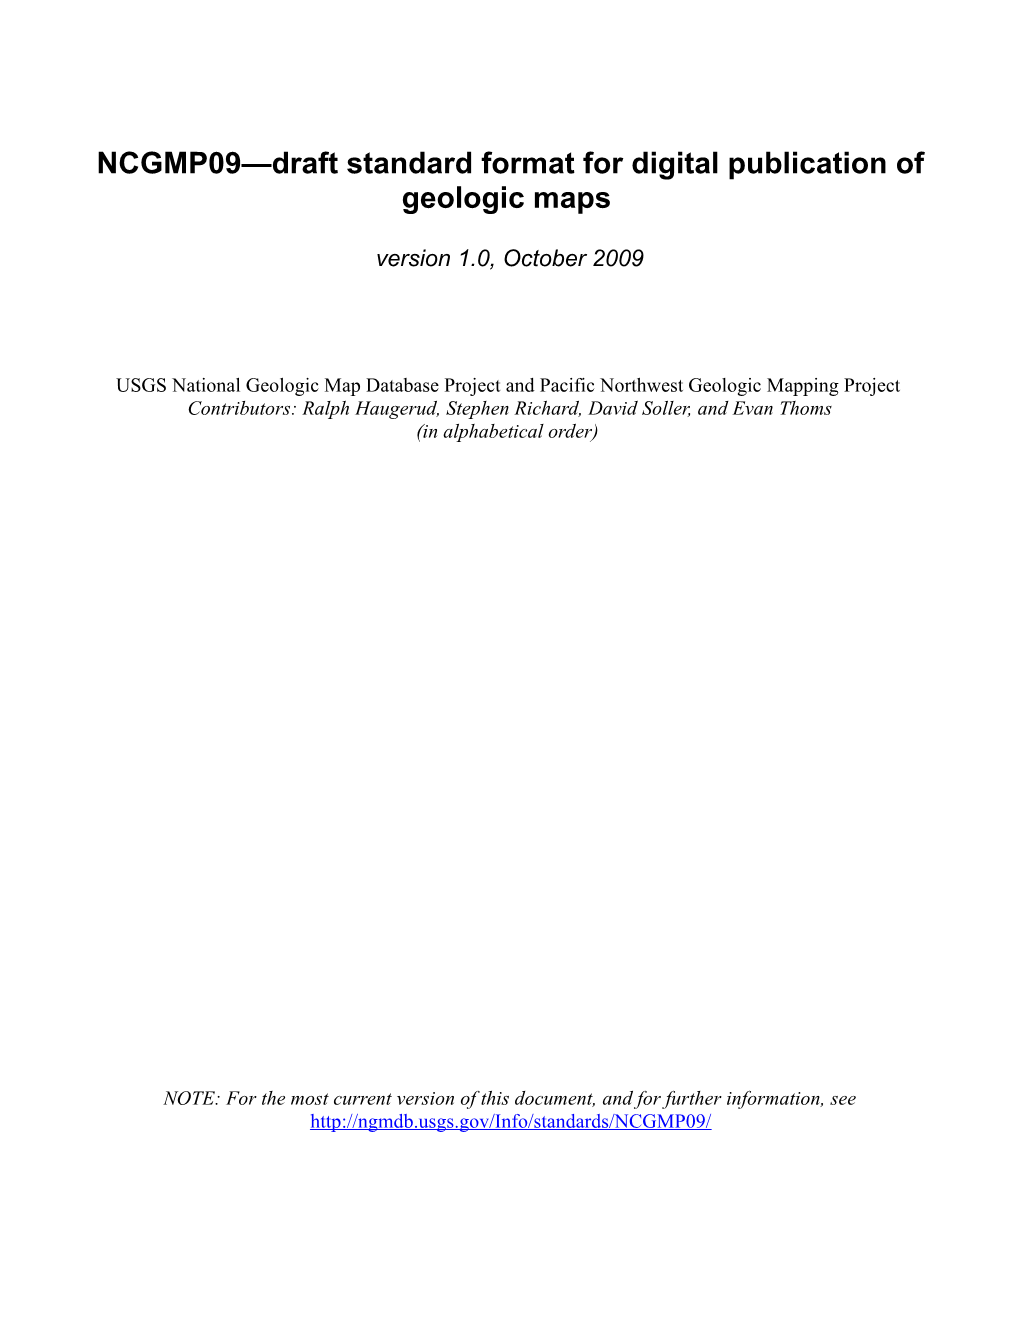 NCGMP09-A Proposed Standard Format For Digital Publication Of Geologic Maps